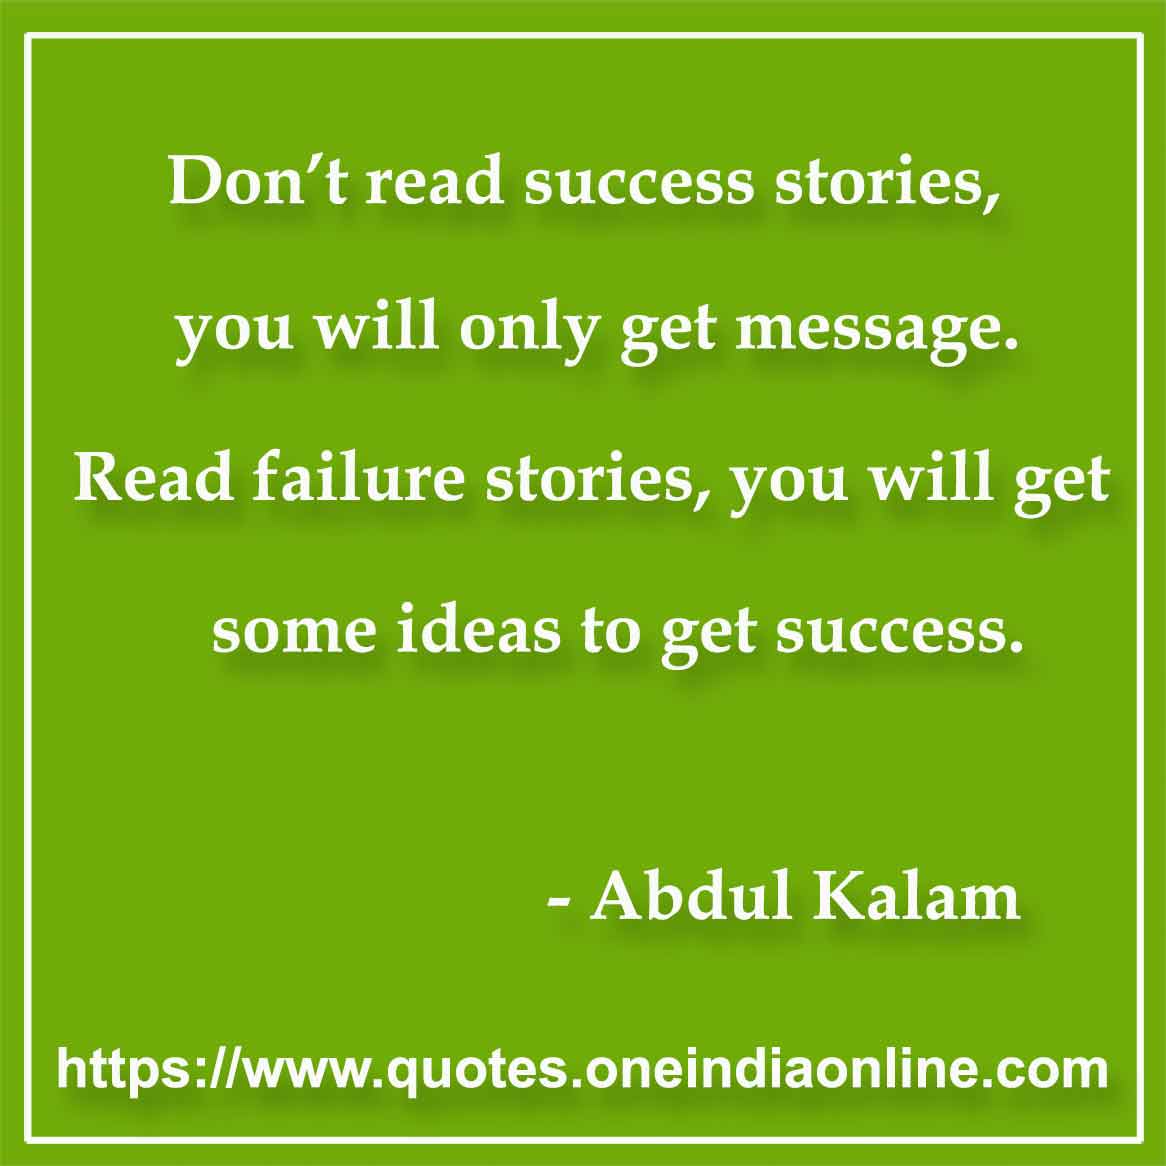 Famous Abdul Kalam Quotes in English